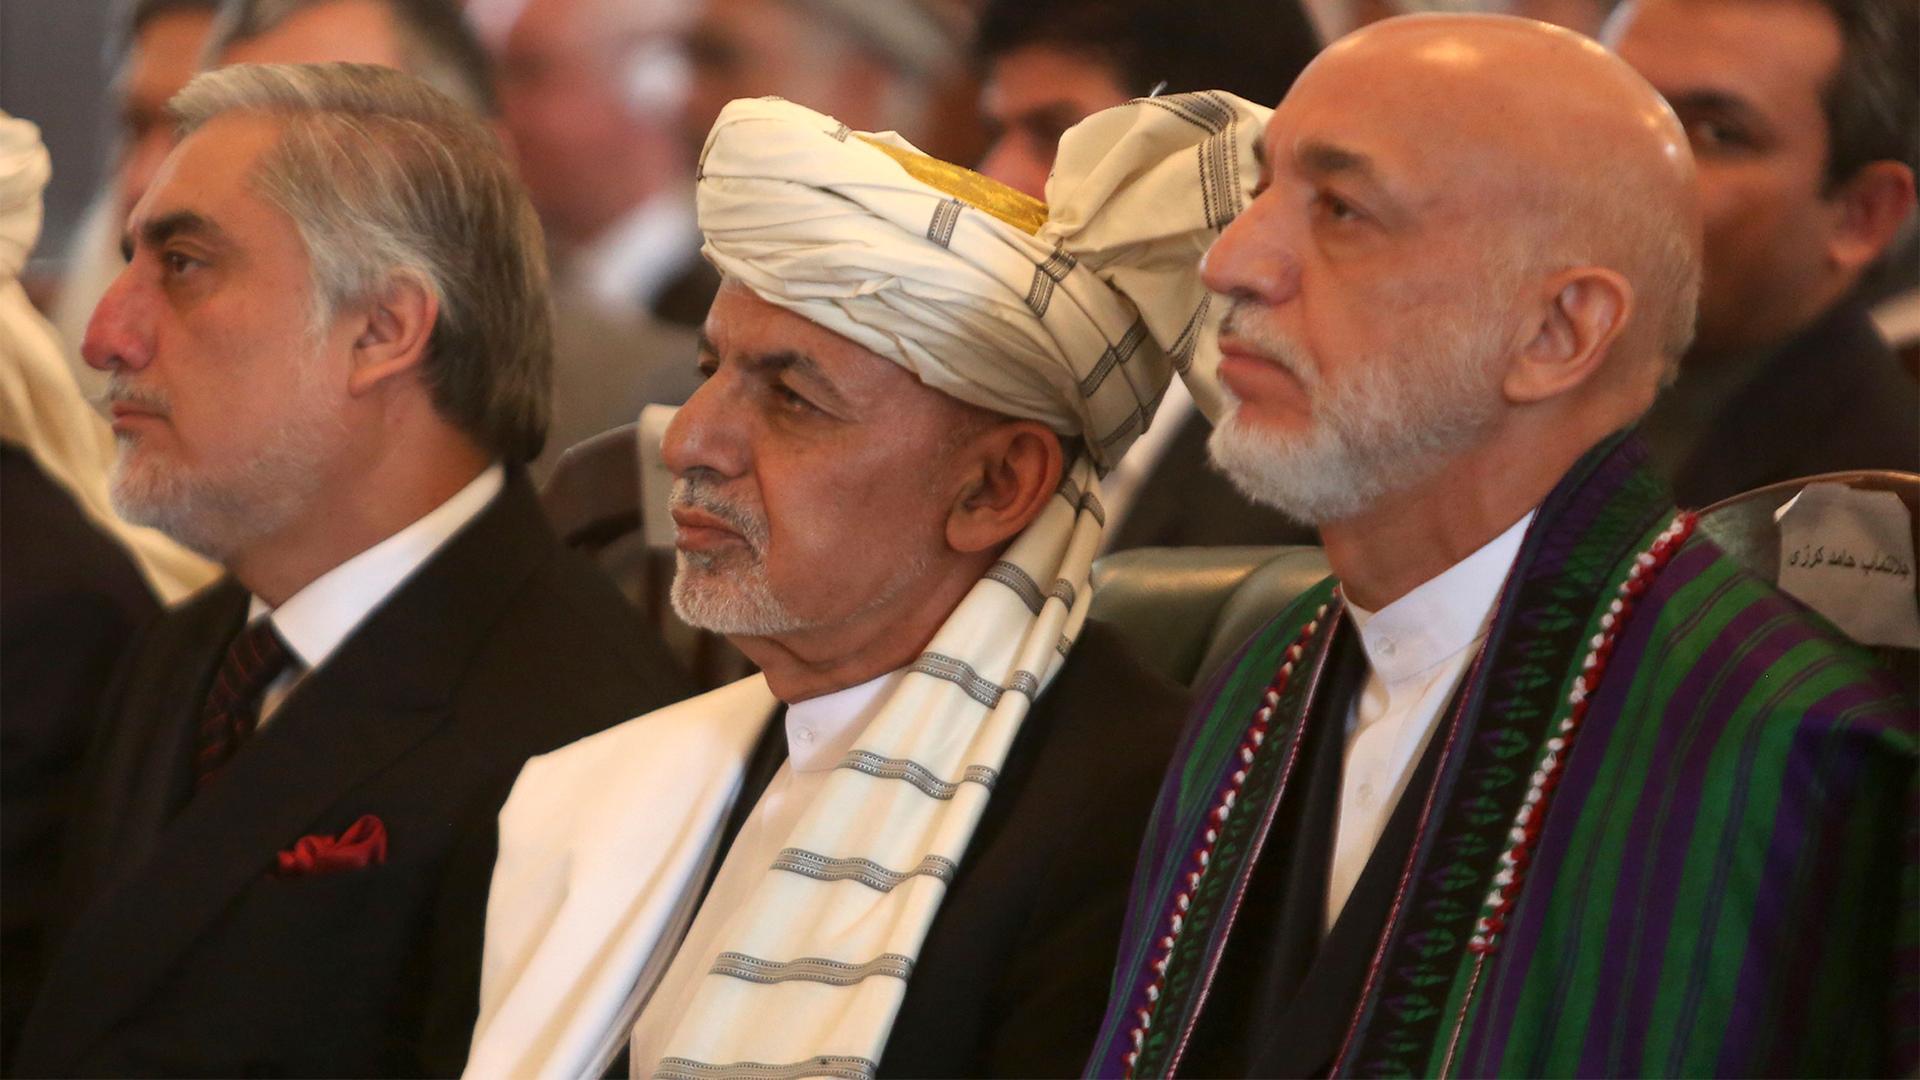 Afghan President Ashraf Ghani, center, former President Hamid Karzai, right, and Chief Executive Abdullah Abdullah, left, watch the live broadcast of Gulbuddin Hekmatyar after the signing of a peace treaty at the presidential palace in Kabul, Afghanistan